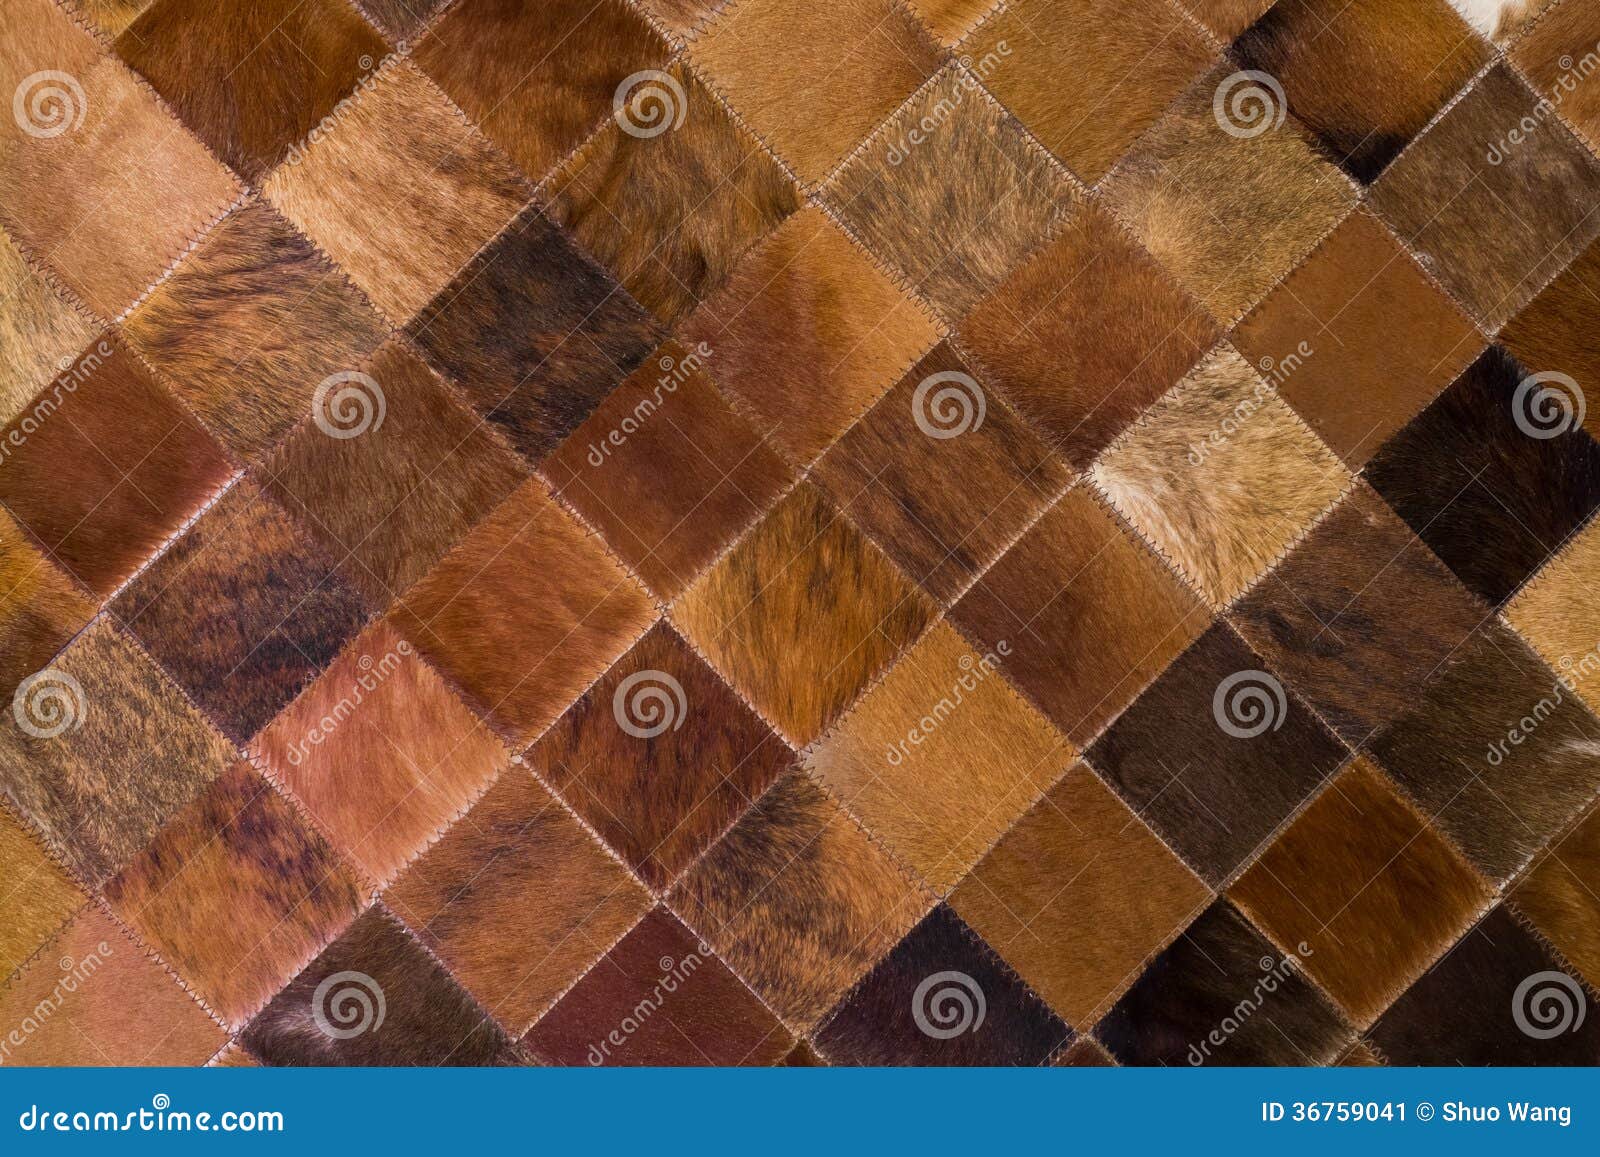 checked carpet background